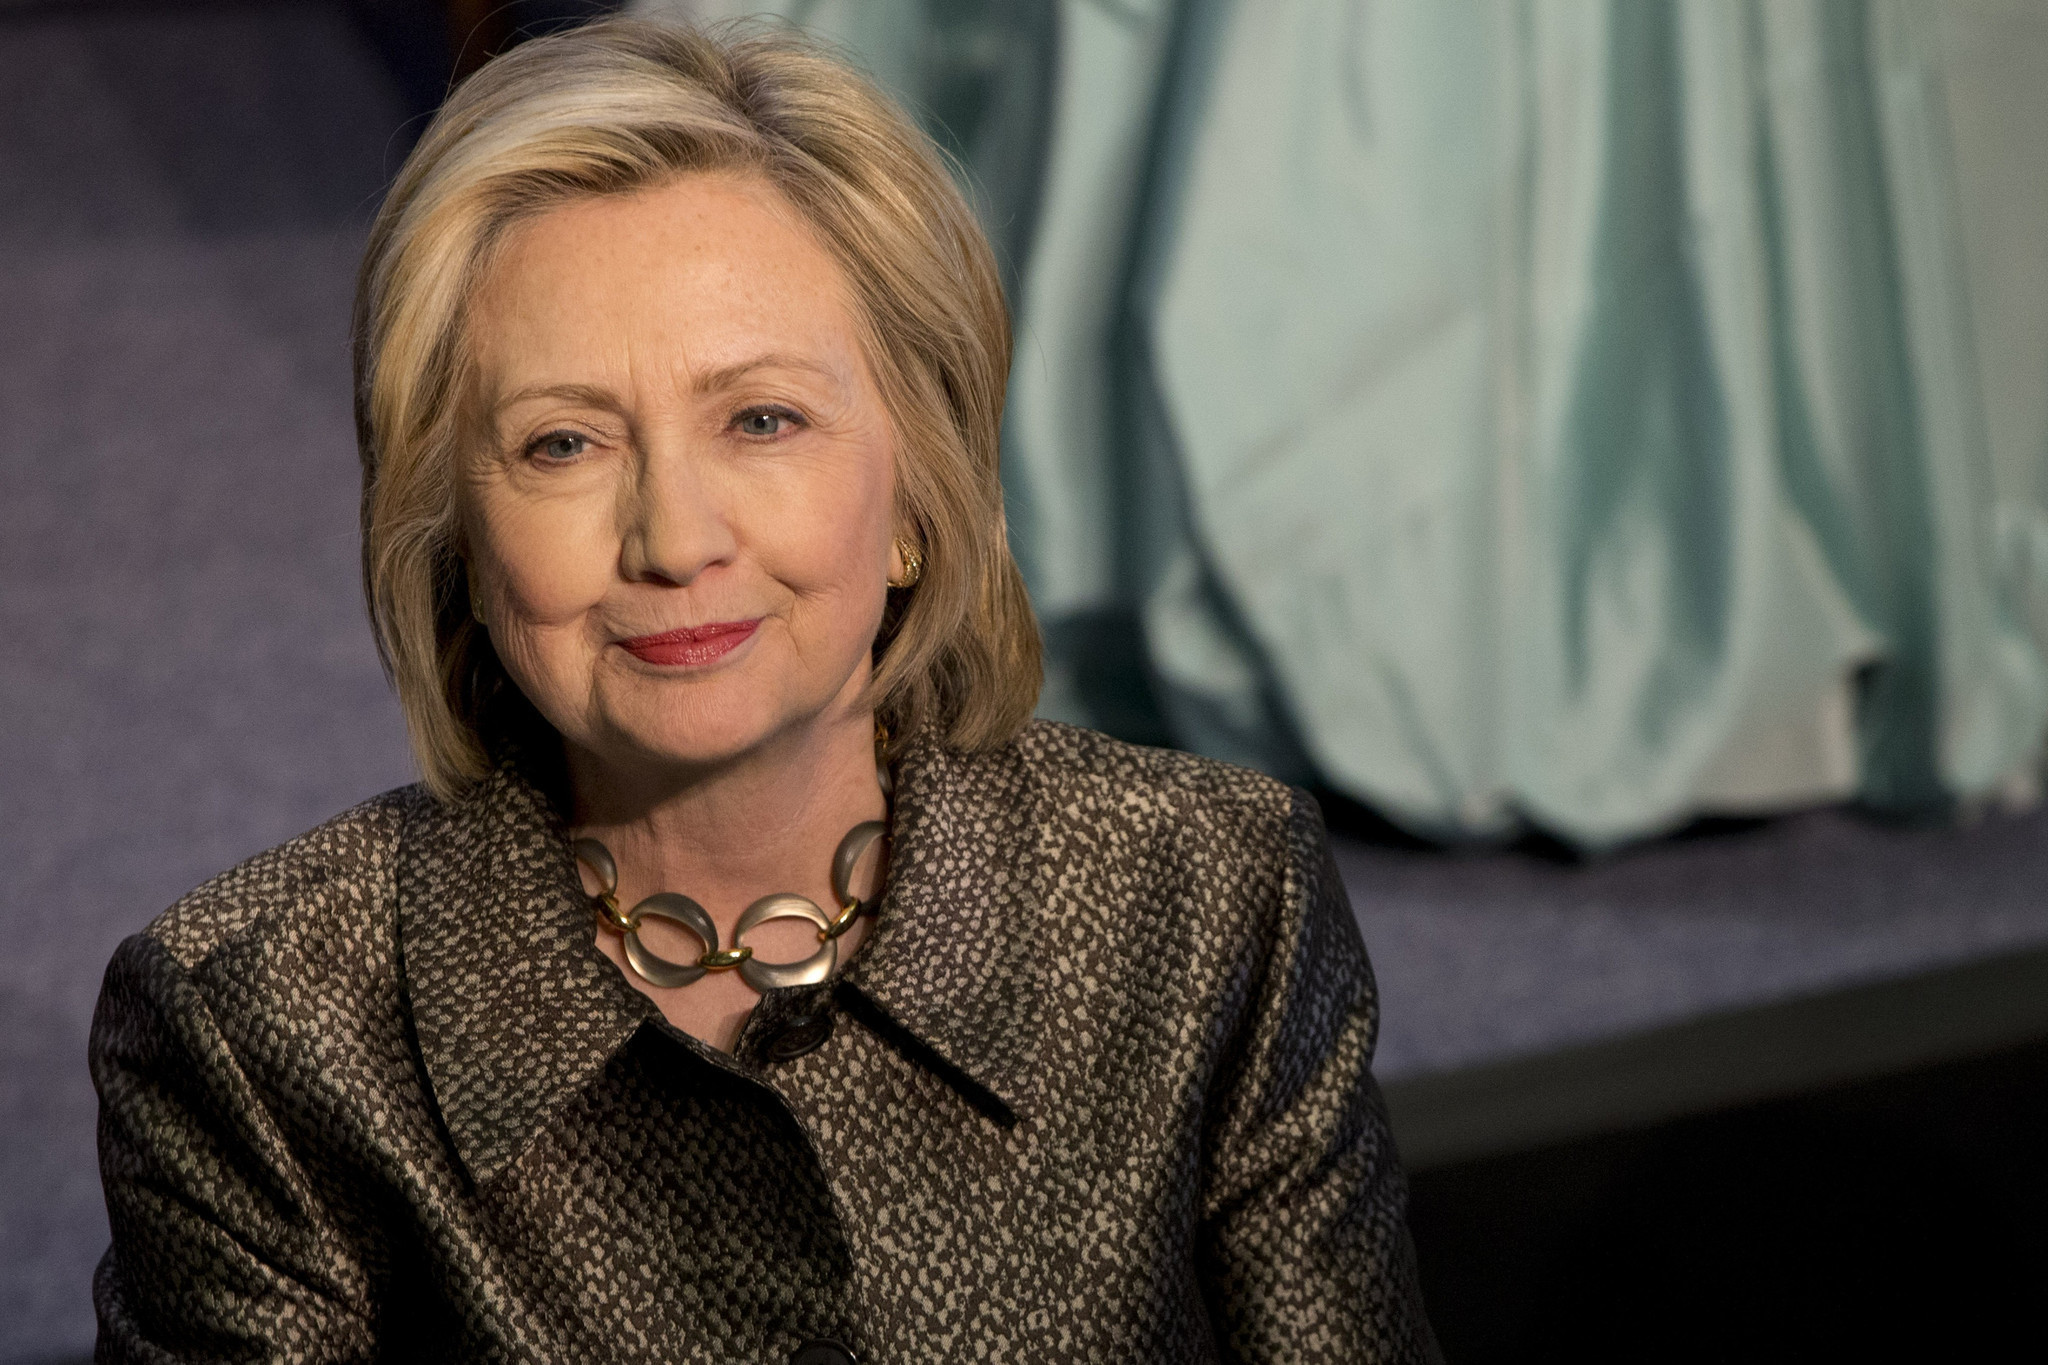 GOP's latest Benghazi-related inquiry could benefit Hillary Clinton